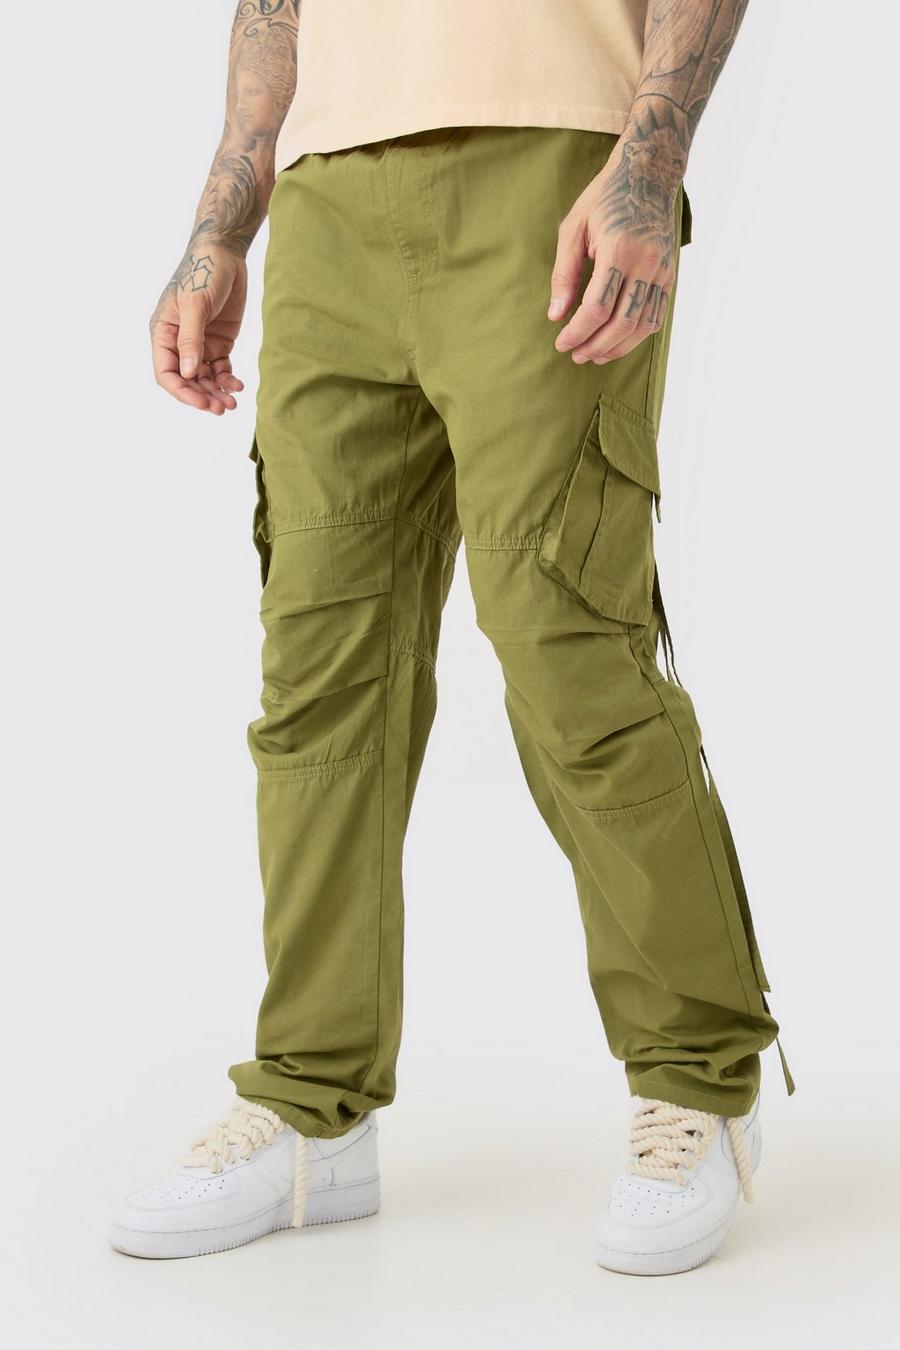 Khaki Tall Elasticated Waist Straight Washed Ripstop Cargo Trouser